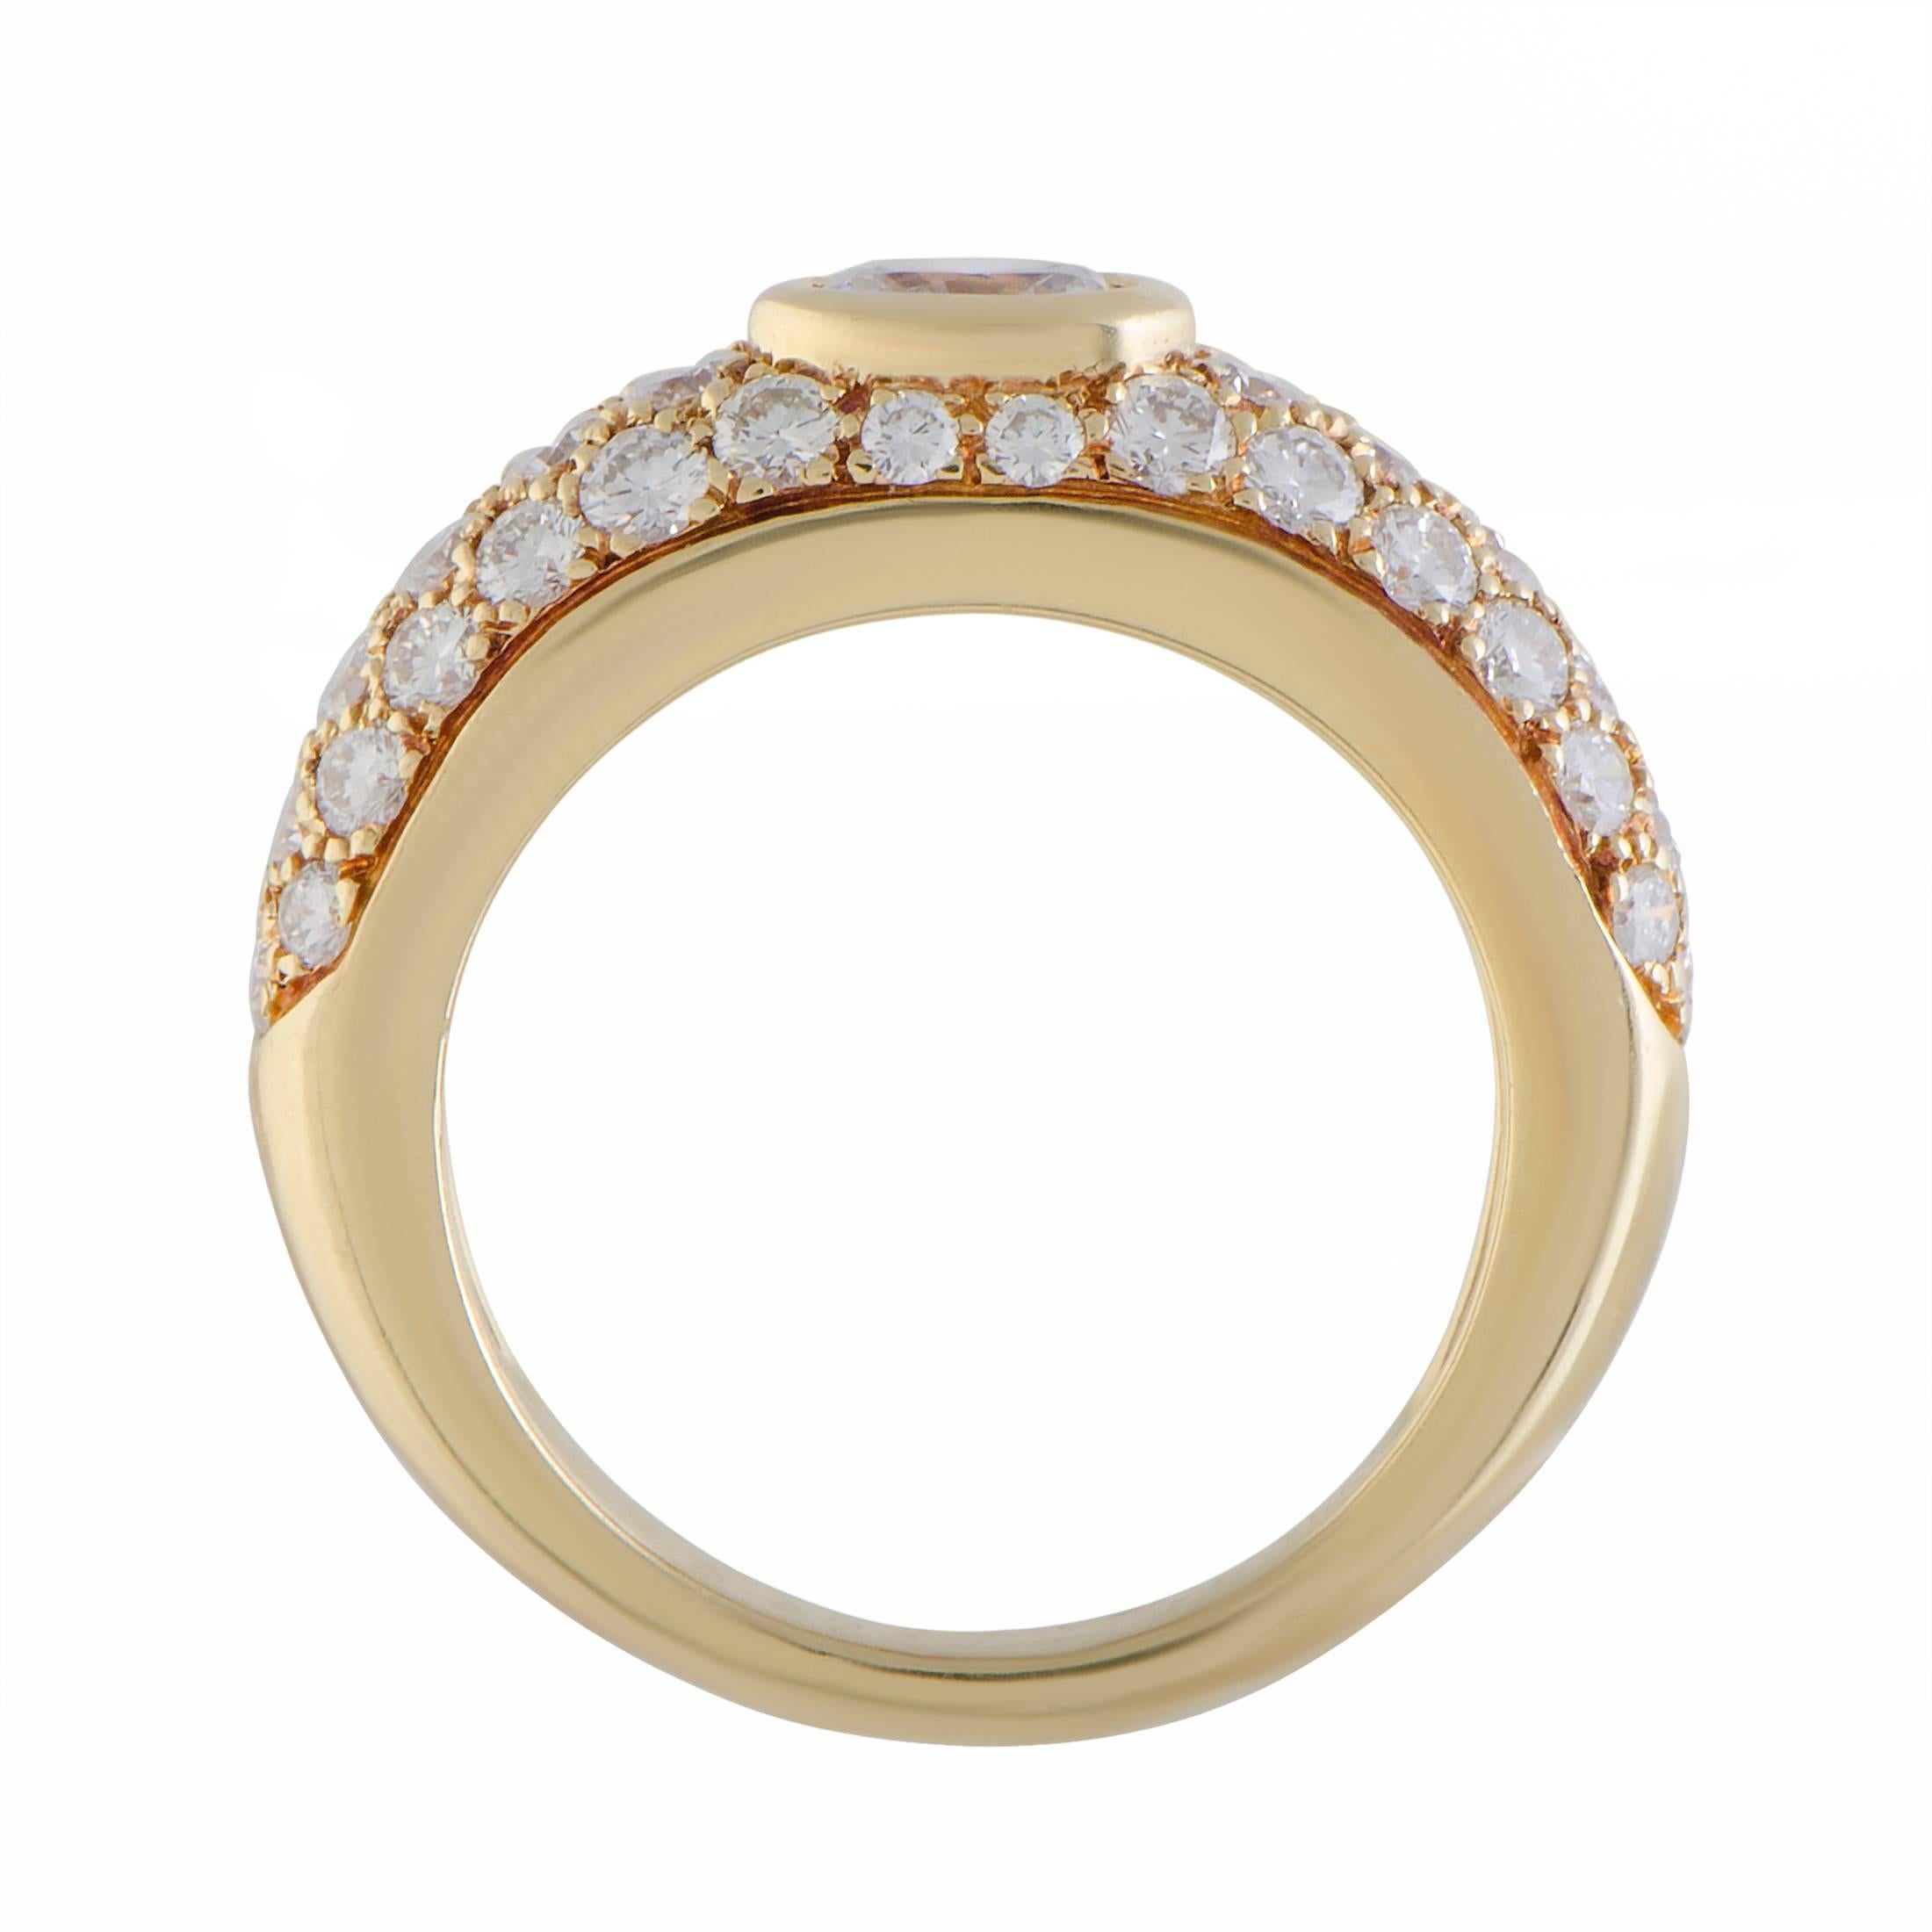 This fascinating engagement ring by Cartier is an item of prestigious quality and refined aesthetic style. The fabulous shimmer of 18K yellow gold in its design is perfectly complemented with the timeless resplendence of EF-color, VVS-clarity